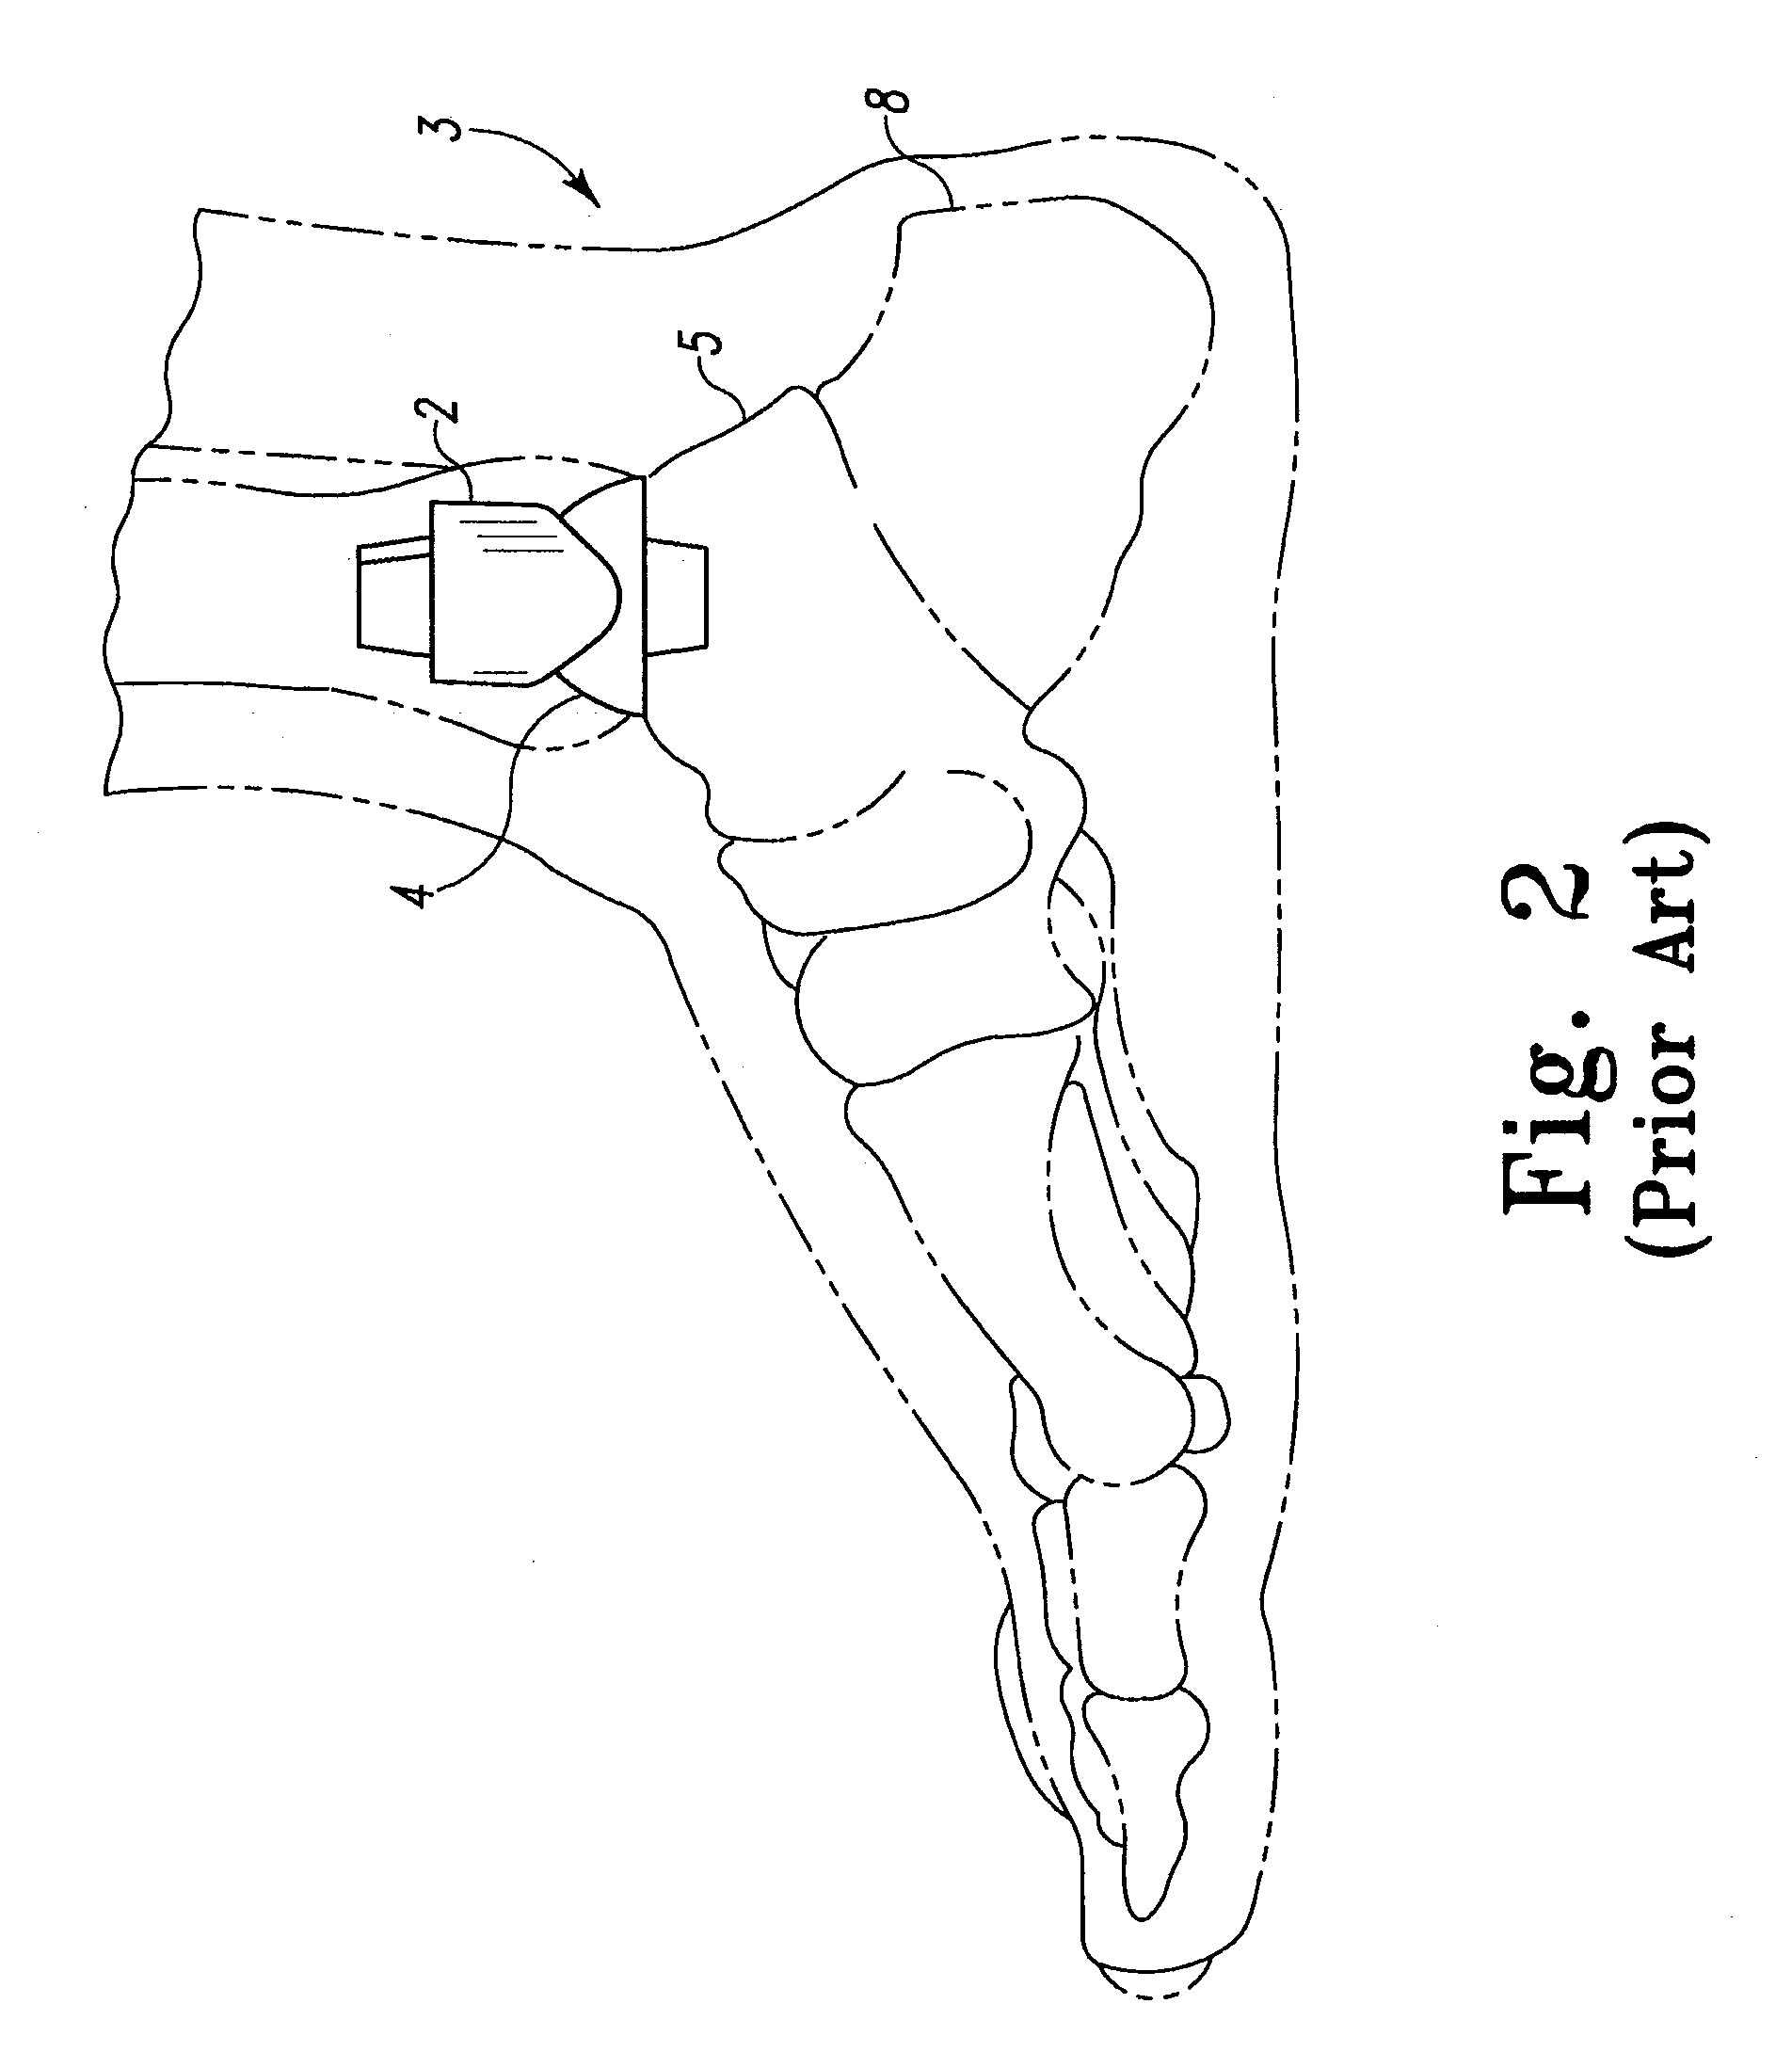 Modular Ankle Prosthesis and Associated Method